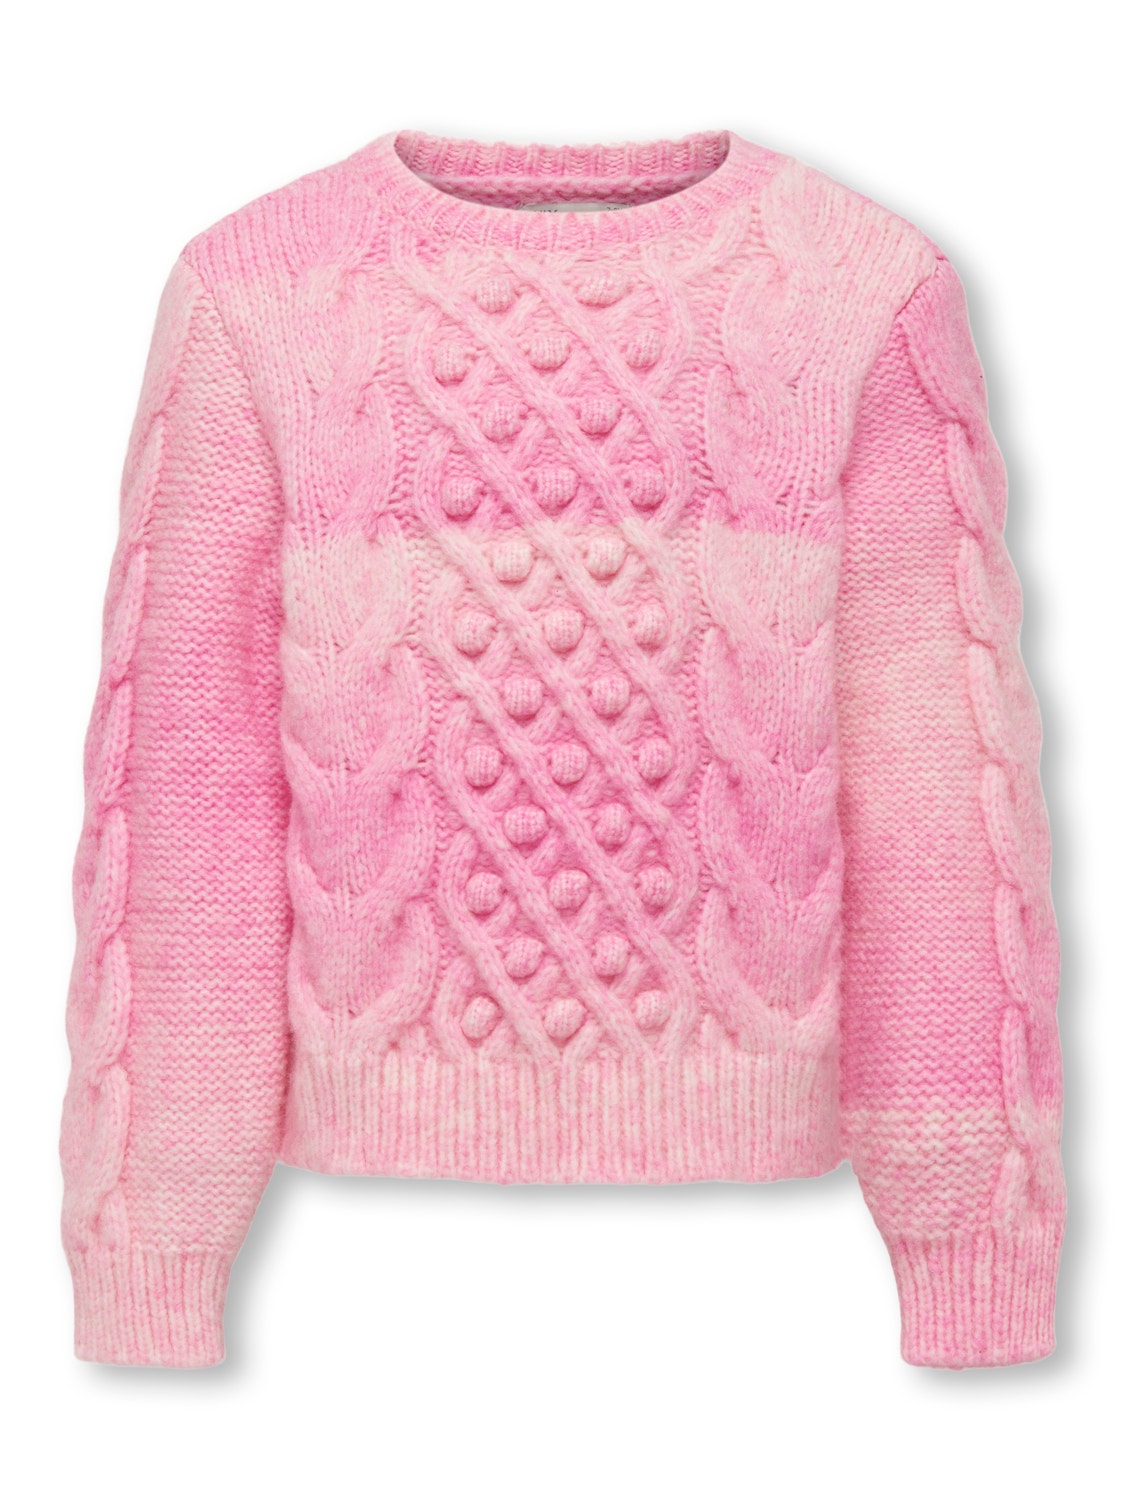 ONLY o-neck knitted pullover -Azalea Pink - 15296492